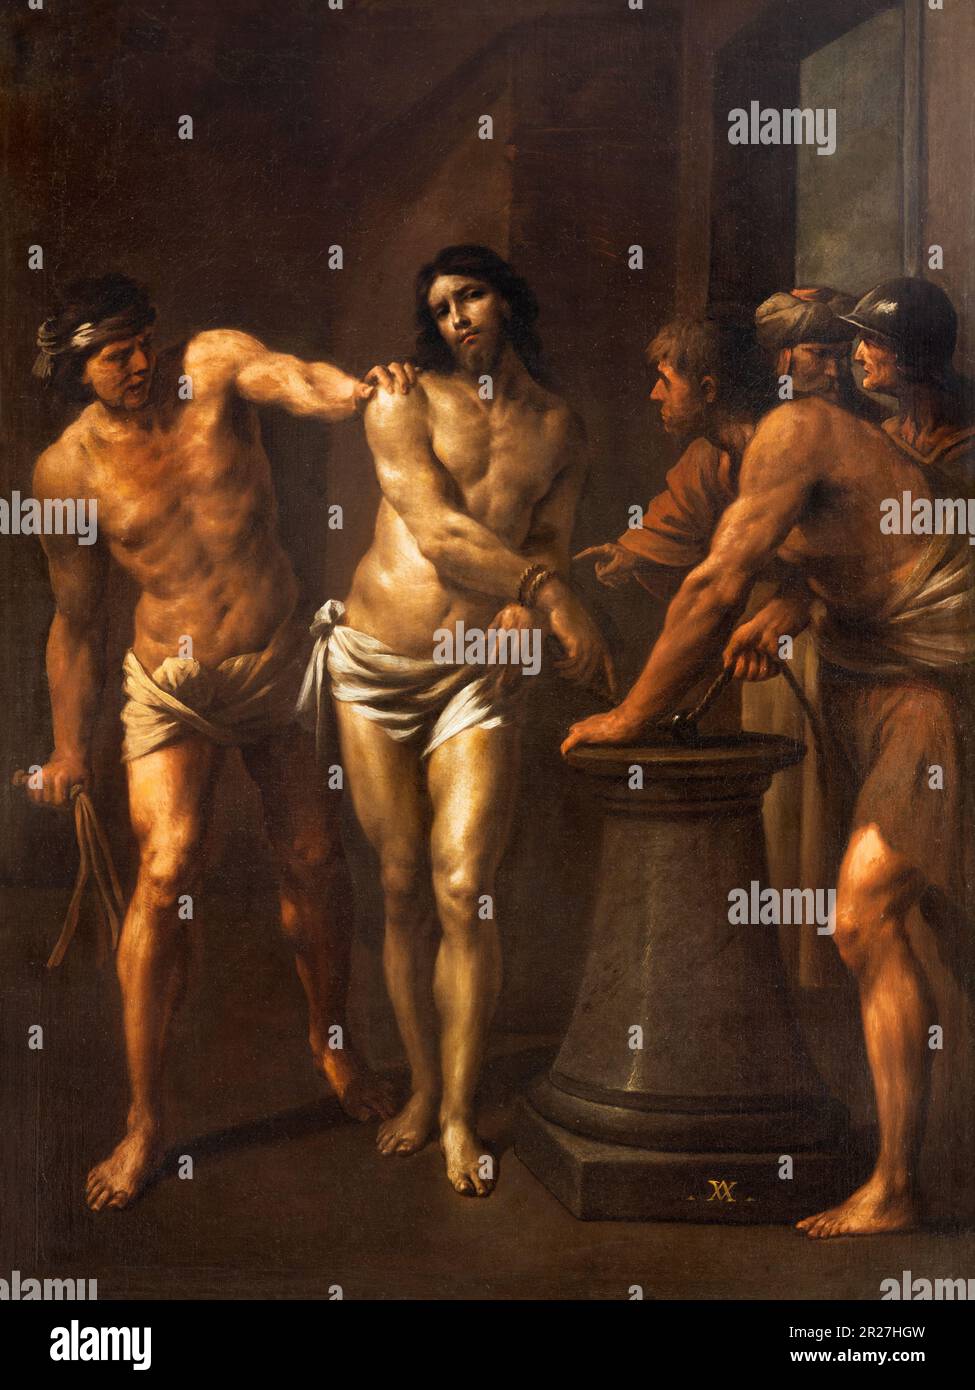 NAPLES, ITALY - APRIL 22, 2023: The painting of Flagellation in the church Pieta dei Turchini by Andrea Vaccaro (1650 - 1674). Stock Photo